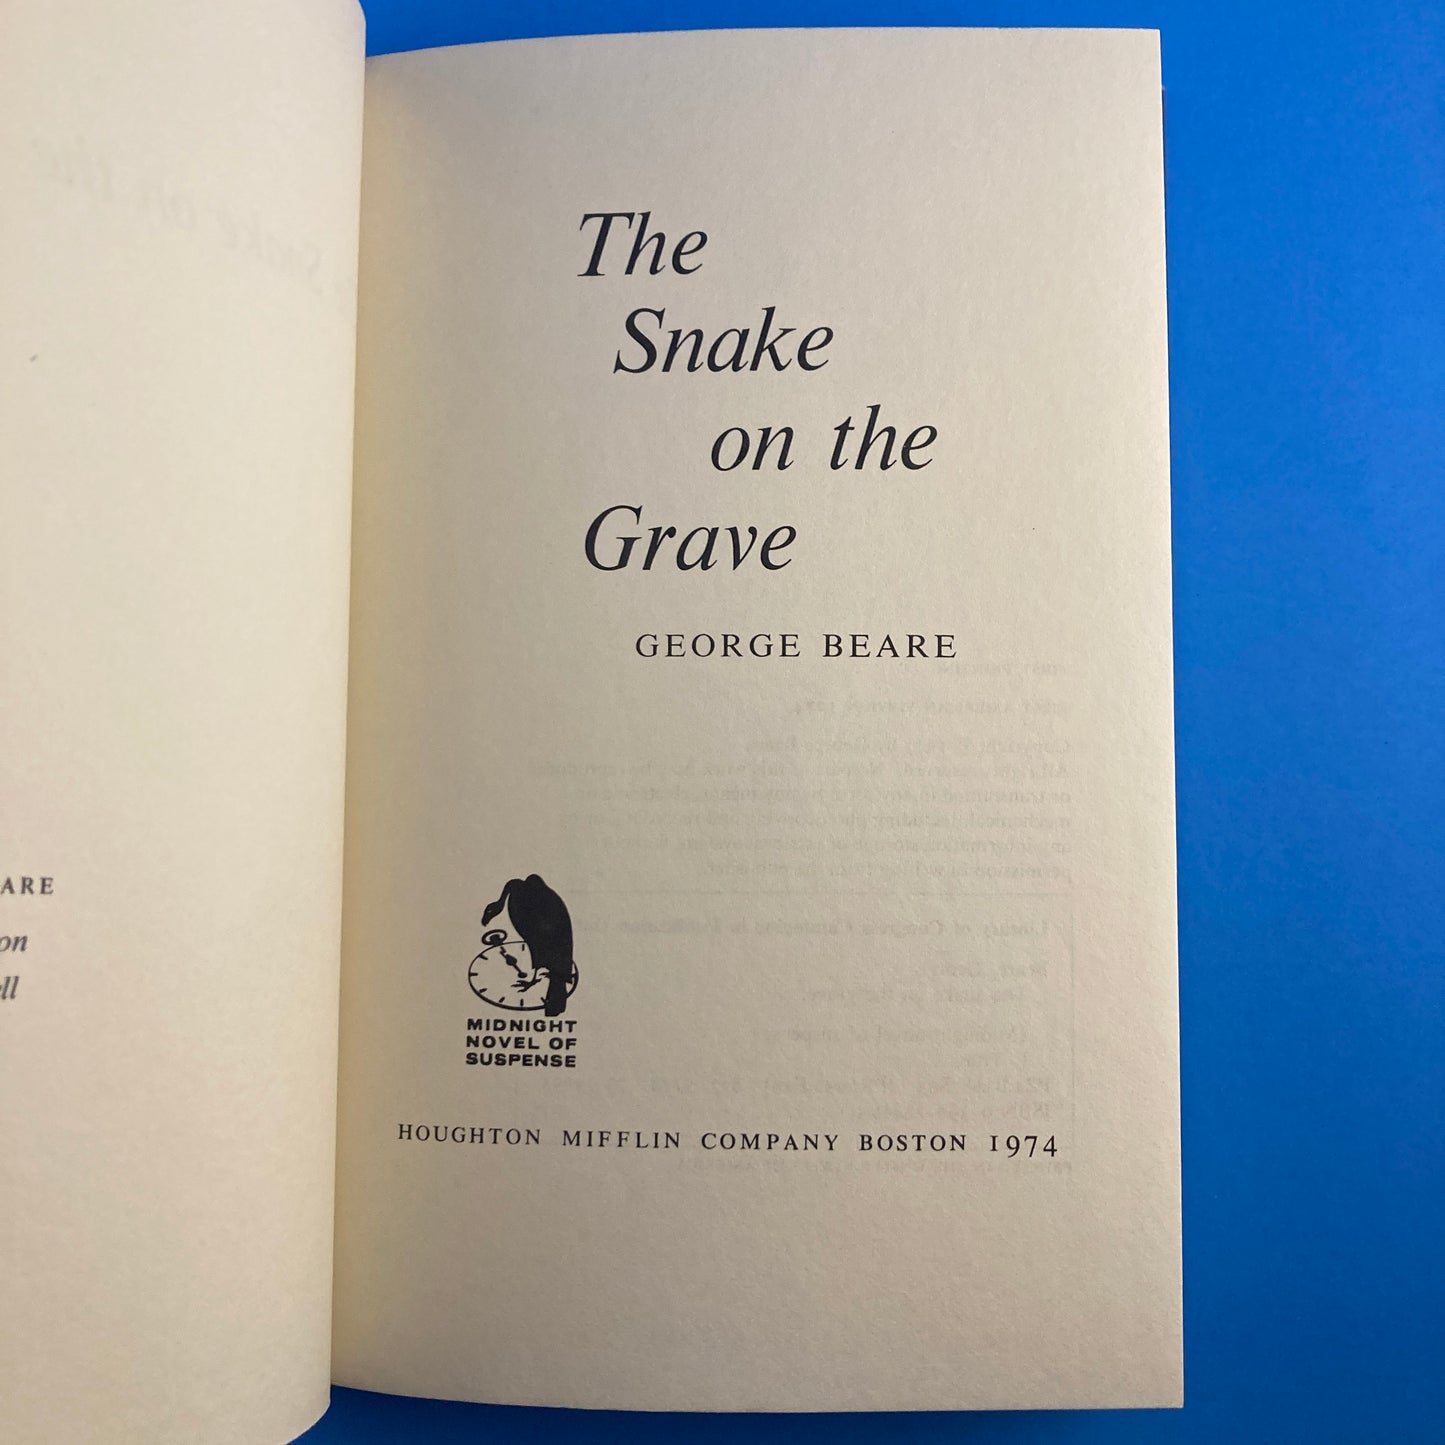 The Snake on the Grave